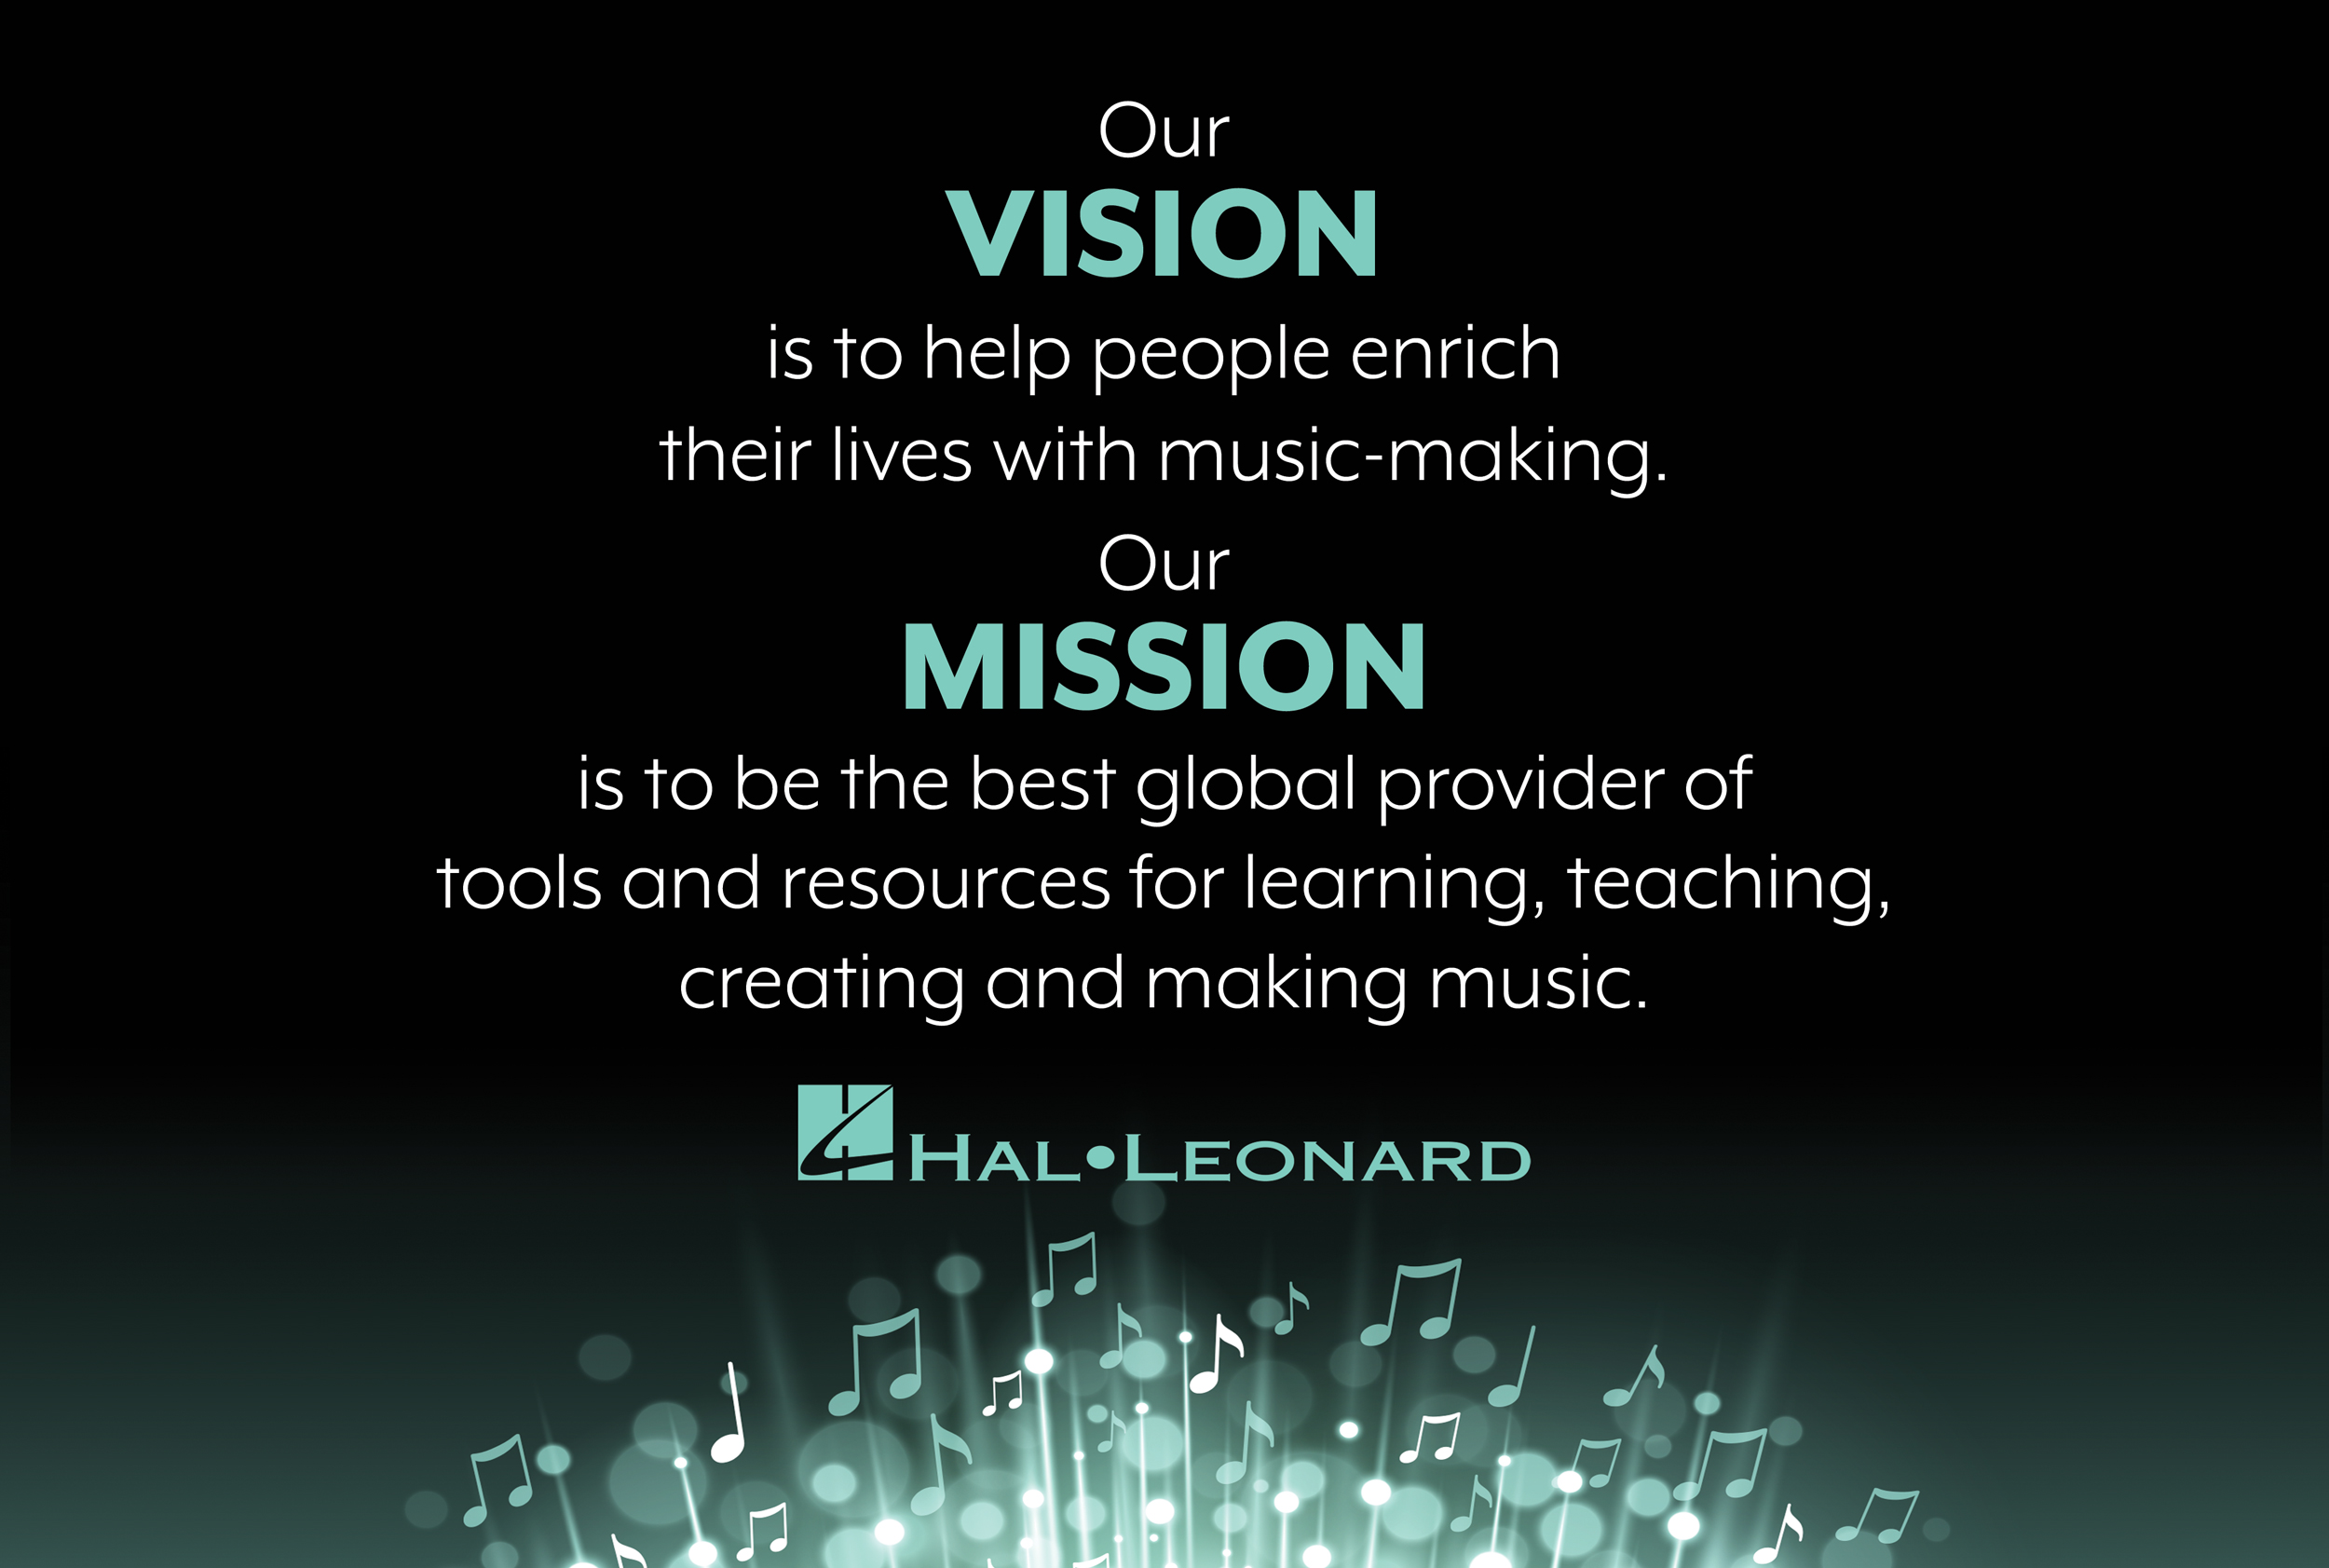 Our Vision is to help people enrich their lives with music-making.. Our Mission is to be the best global provider of tools and resources for learning, teaching, creating and making music.